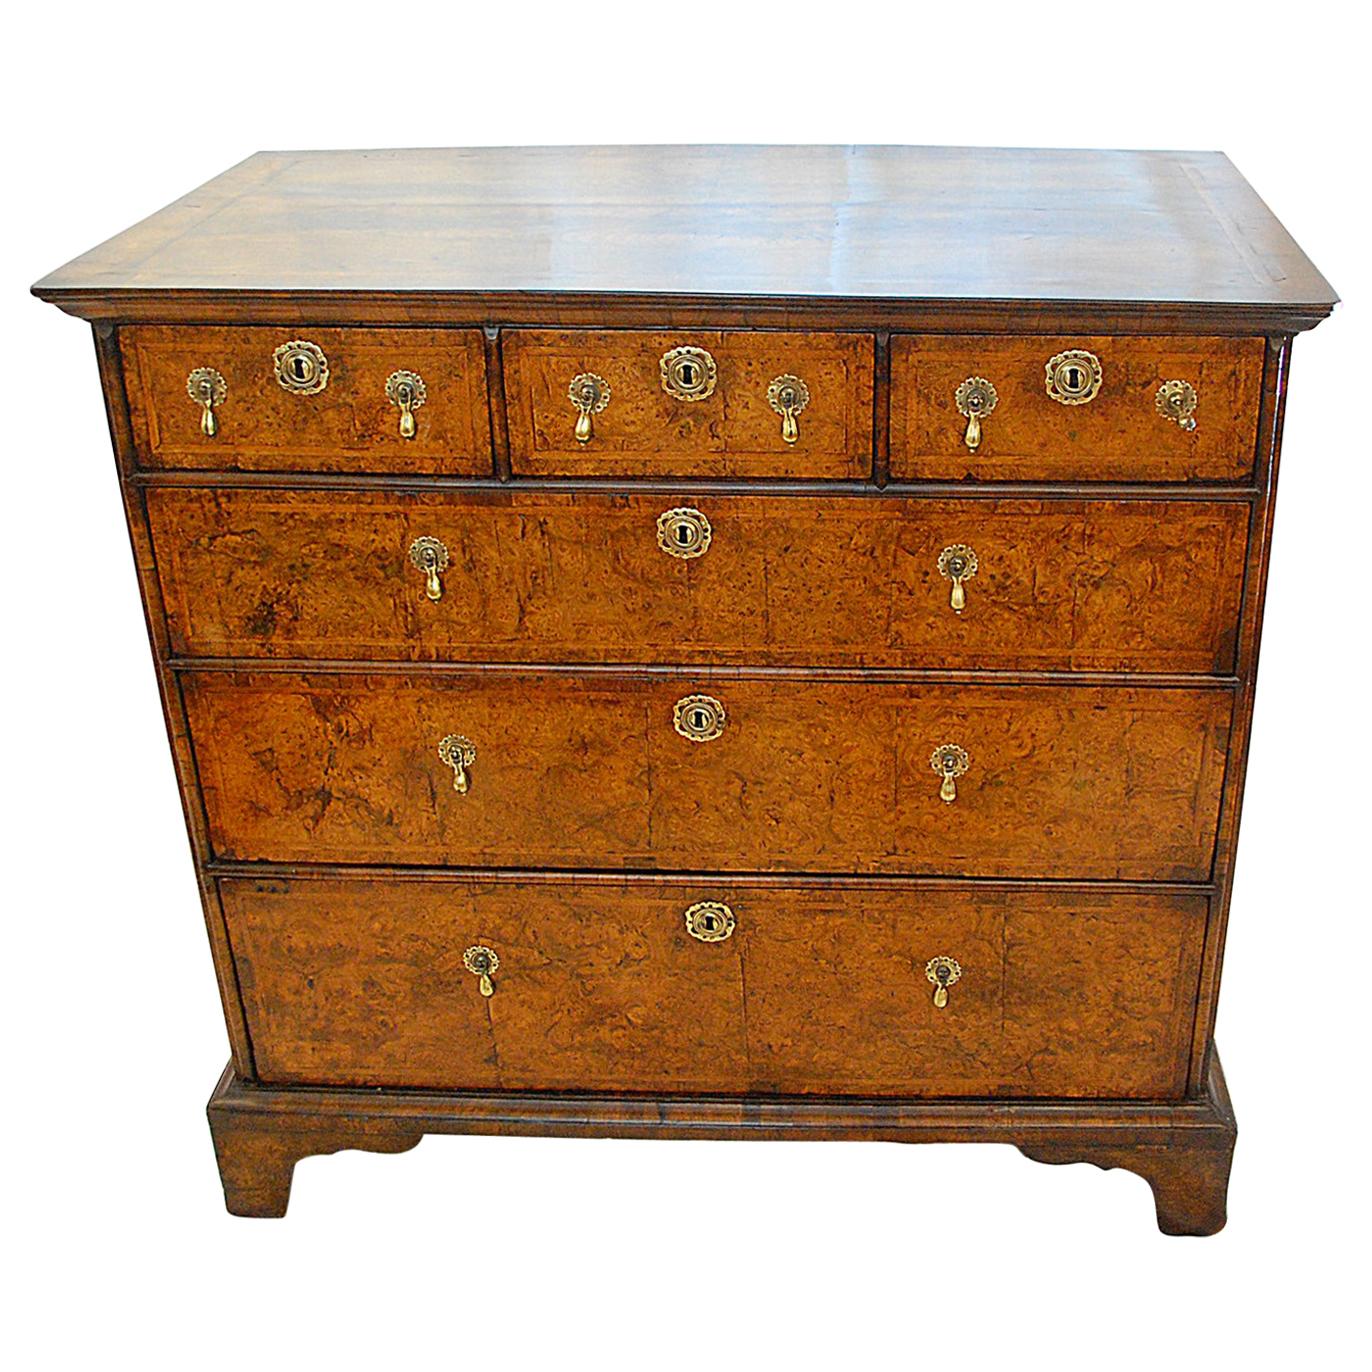 English Queen Anne Period Walnut and Burr Elm Chest of Six Drawers